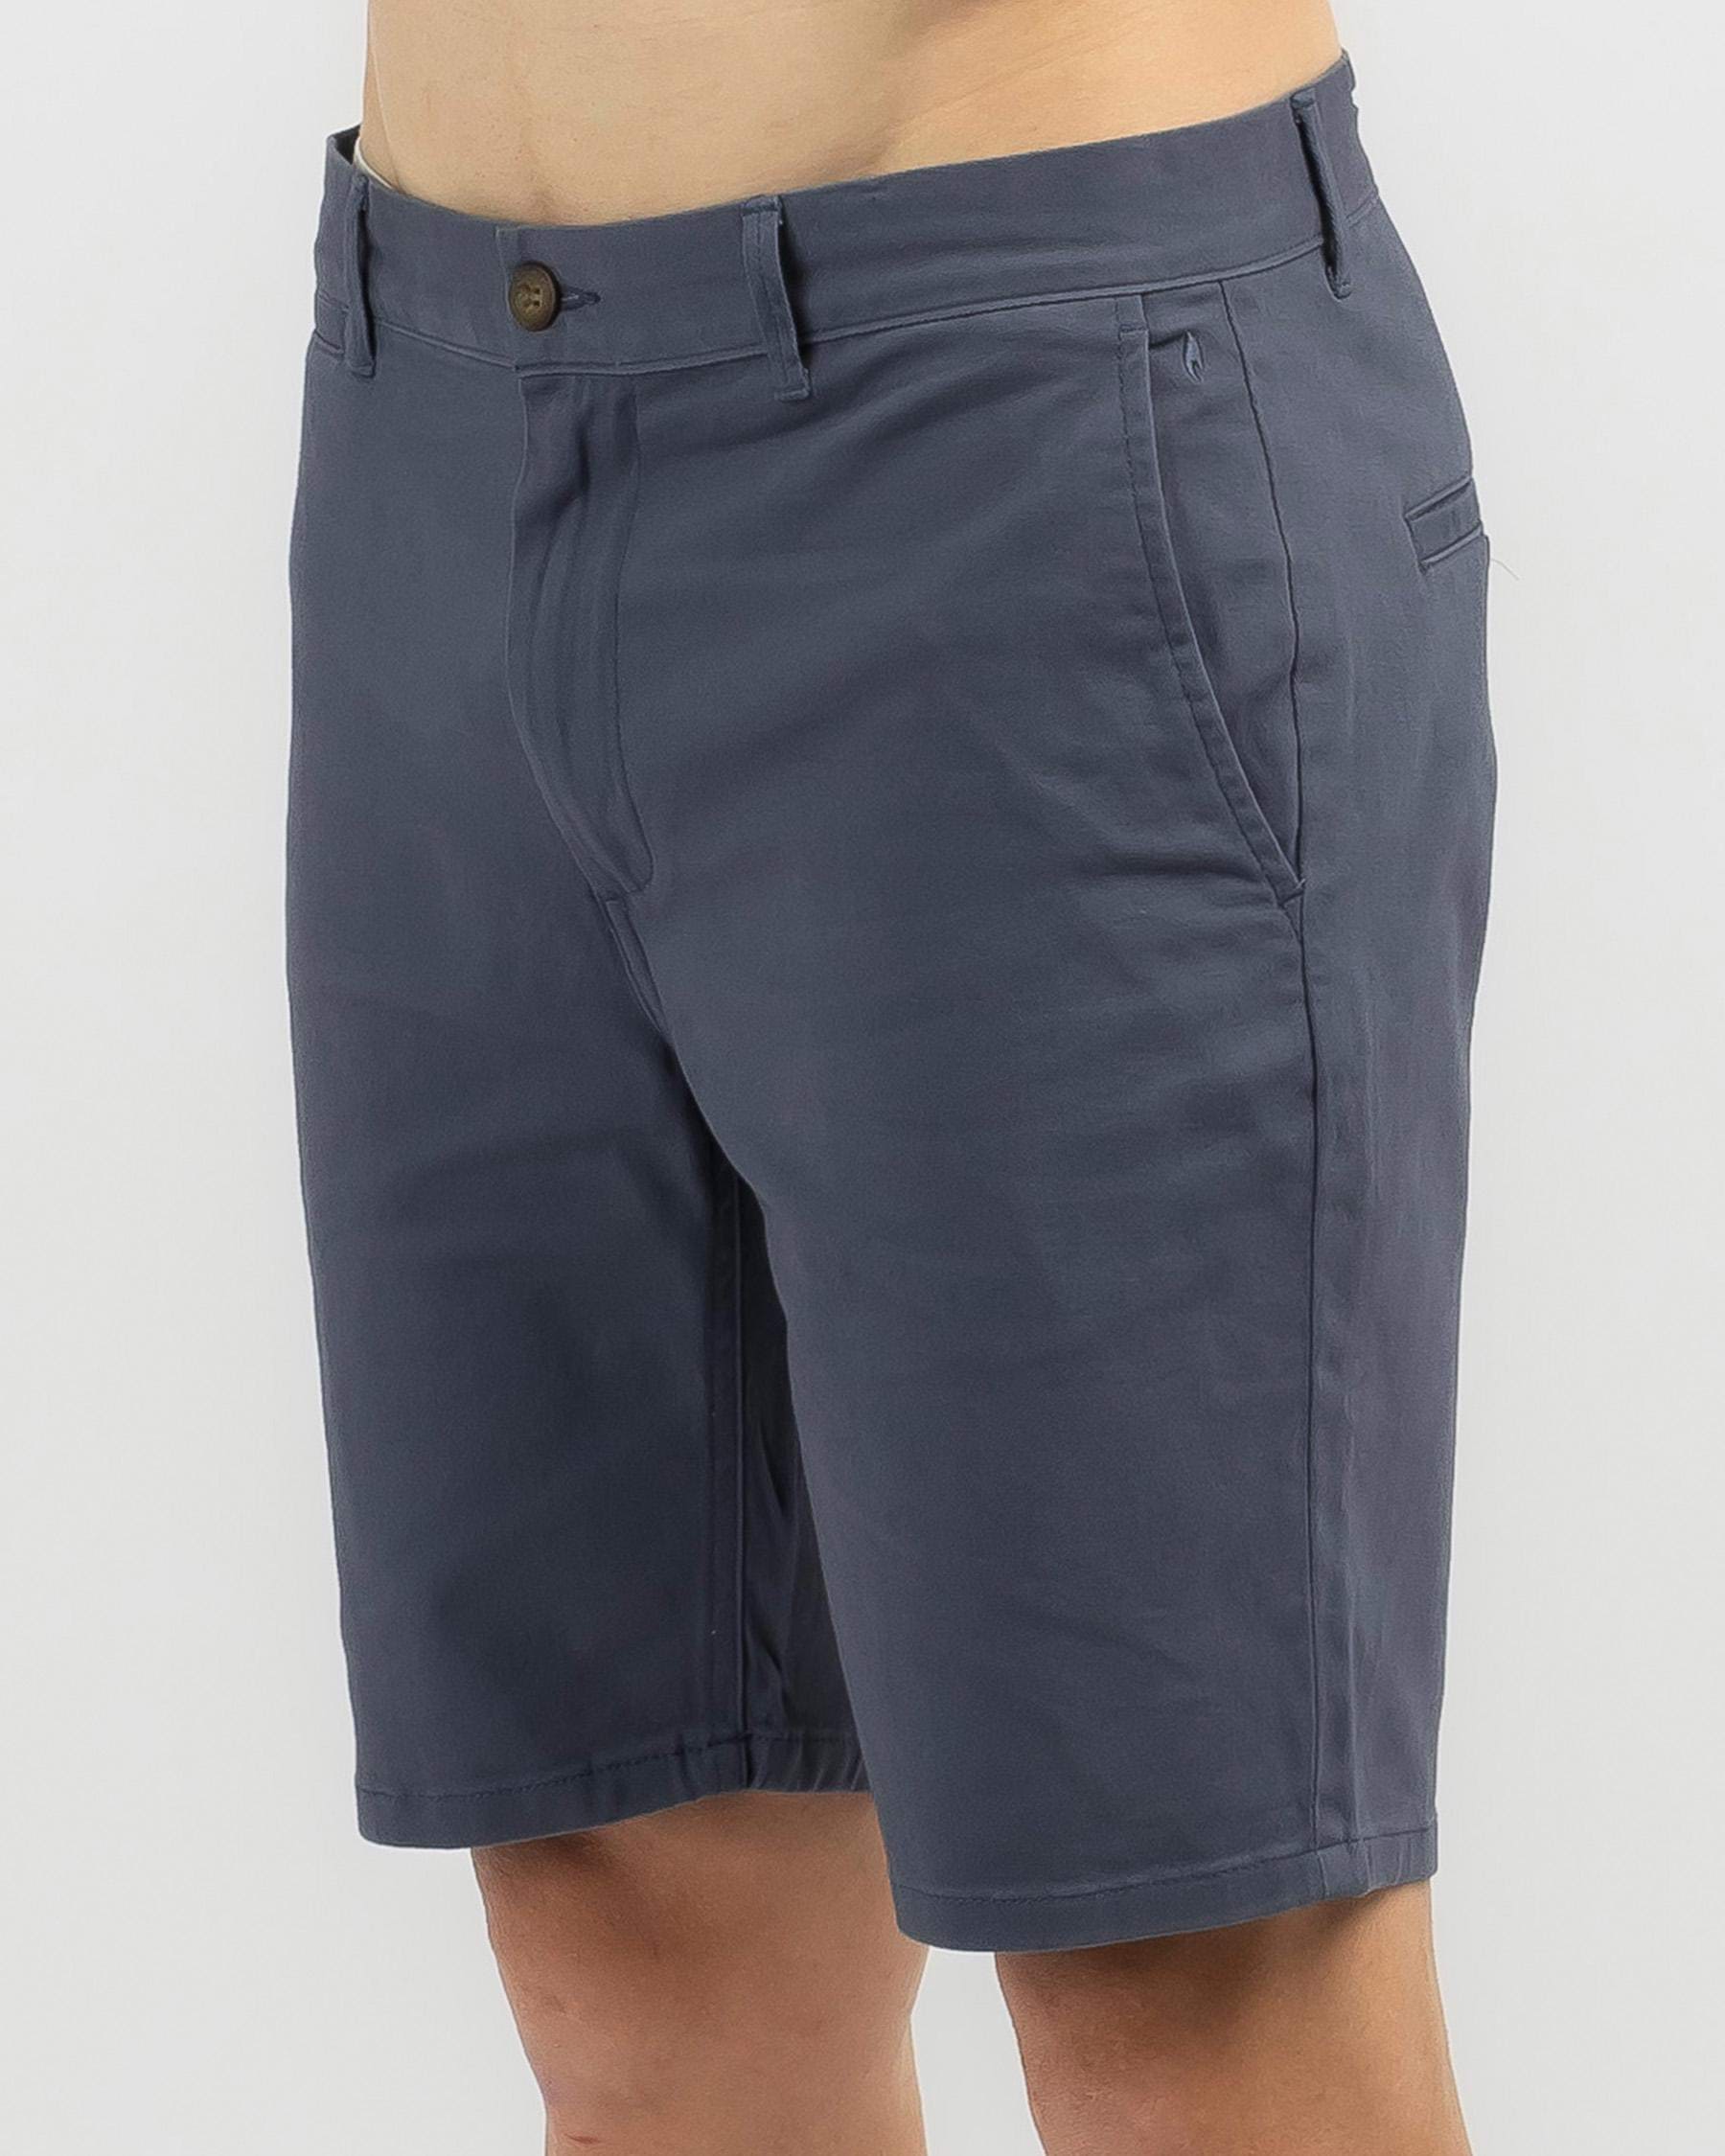 Lucid Lineup Shorts In Slate Blue | City Beach United States